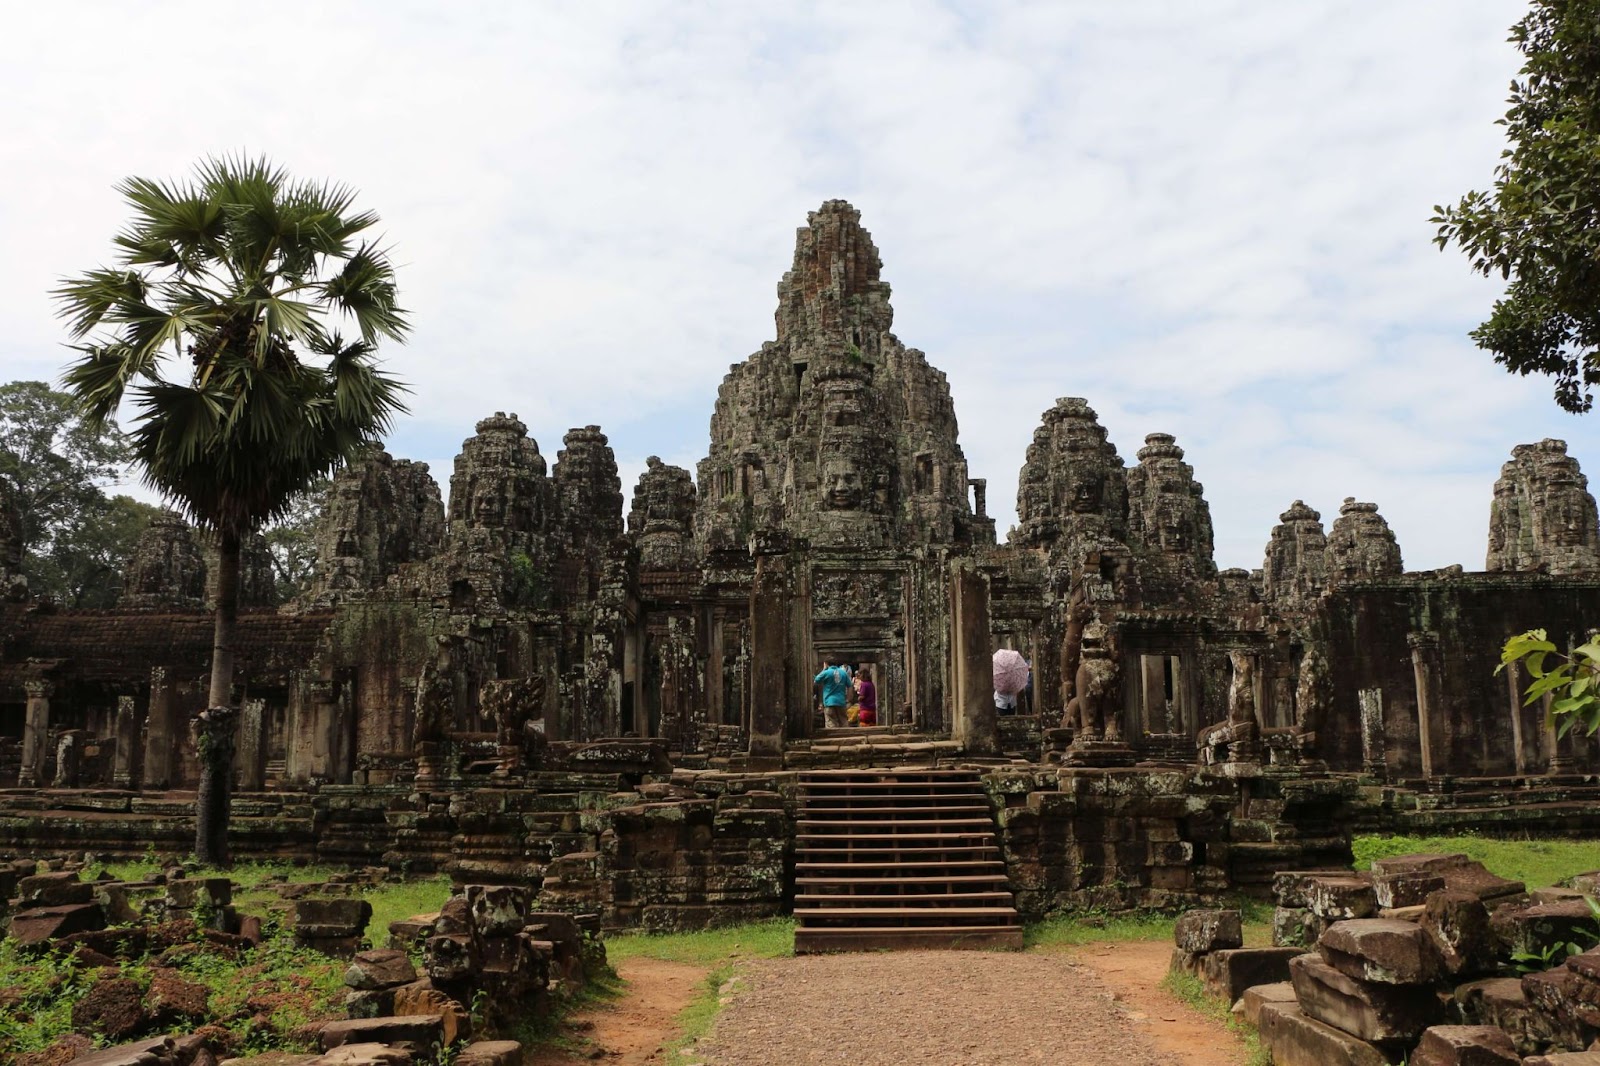 3 days in Siem Reap. This was what greeted us as we walked towards Prasat Bayon.